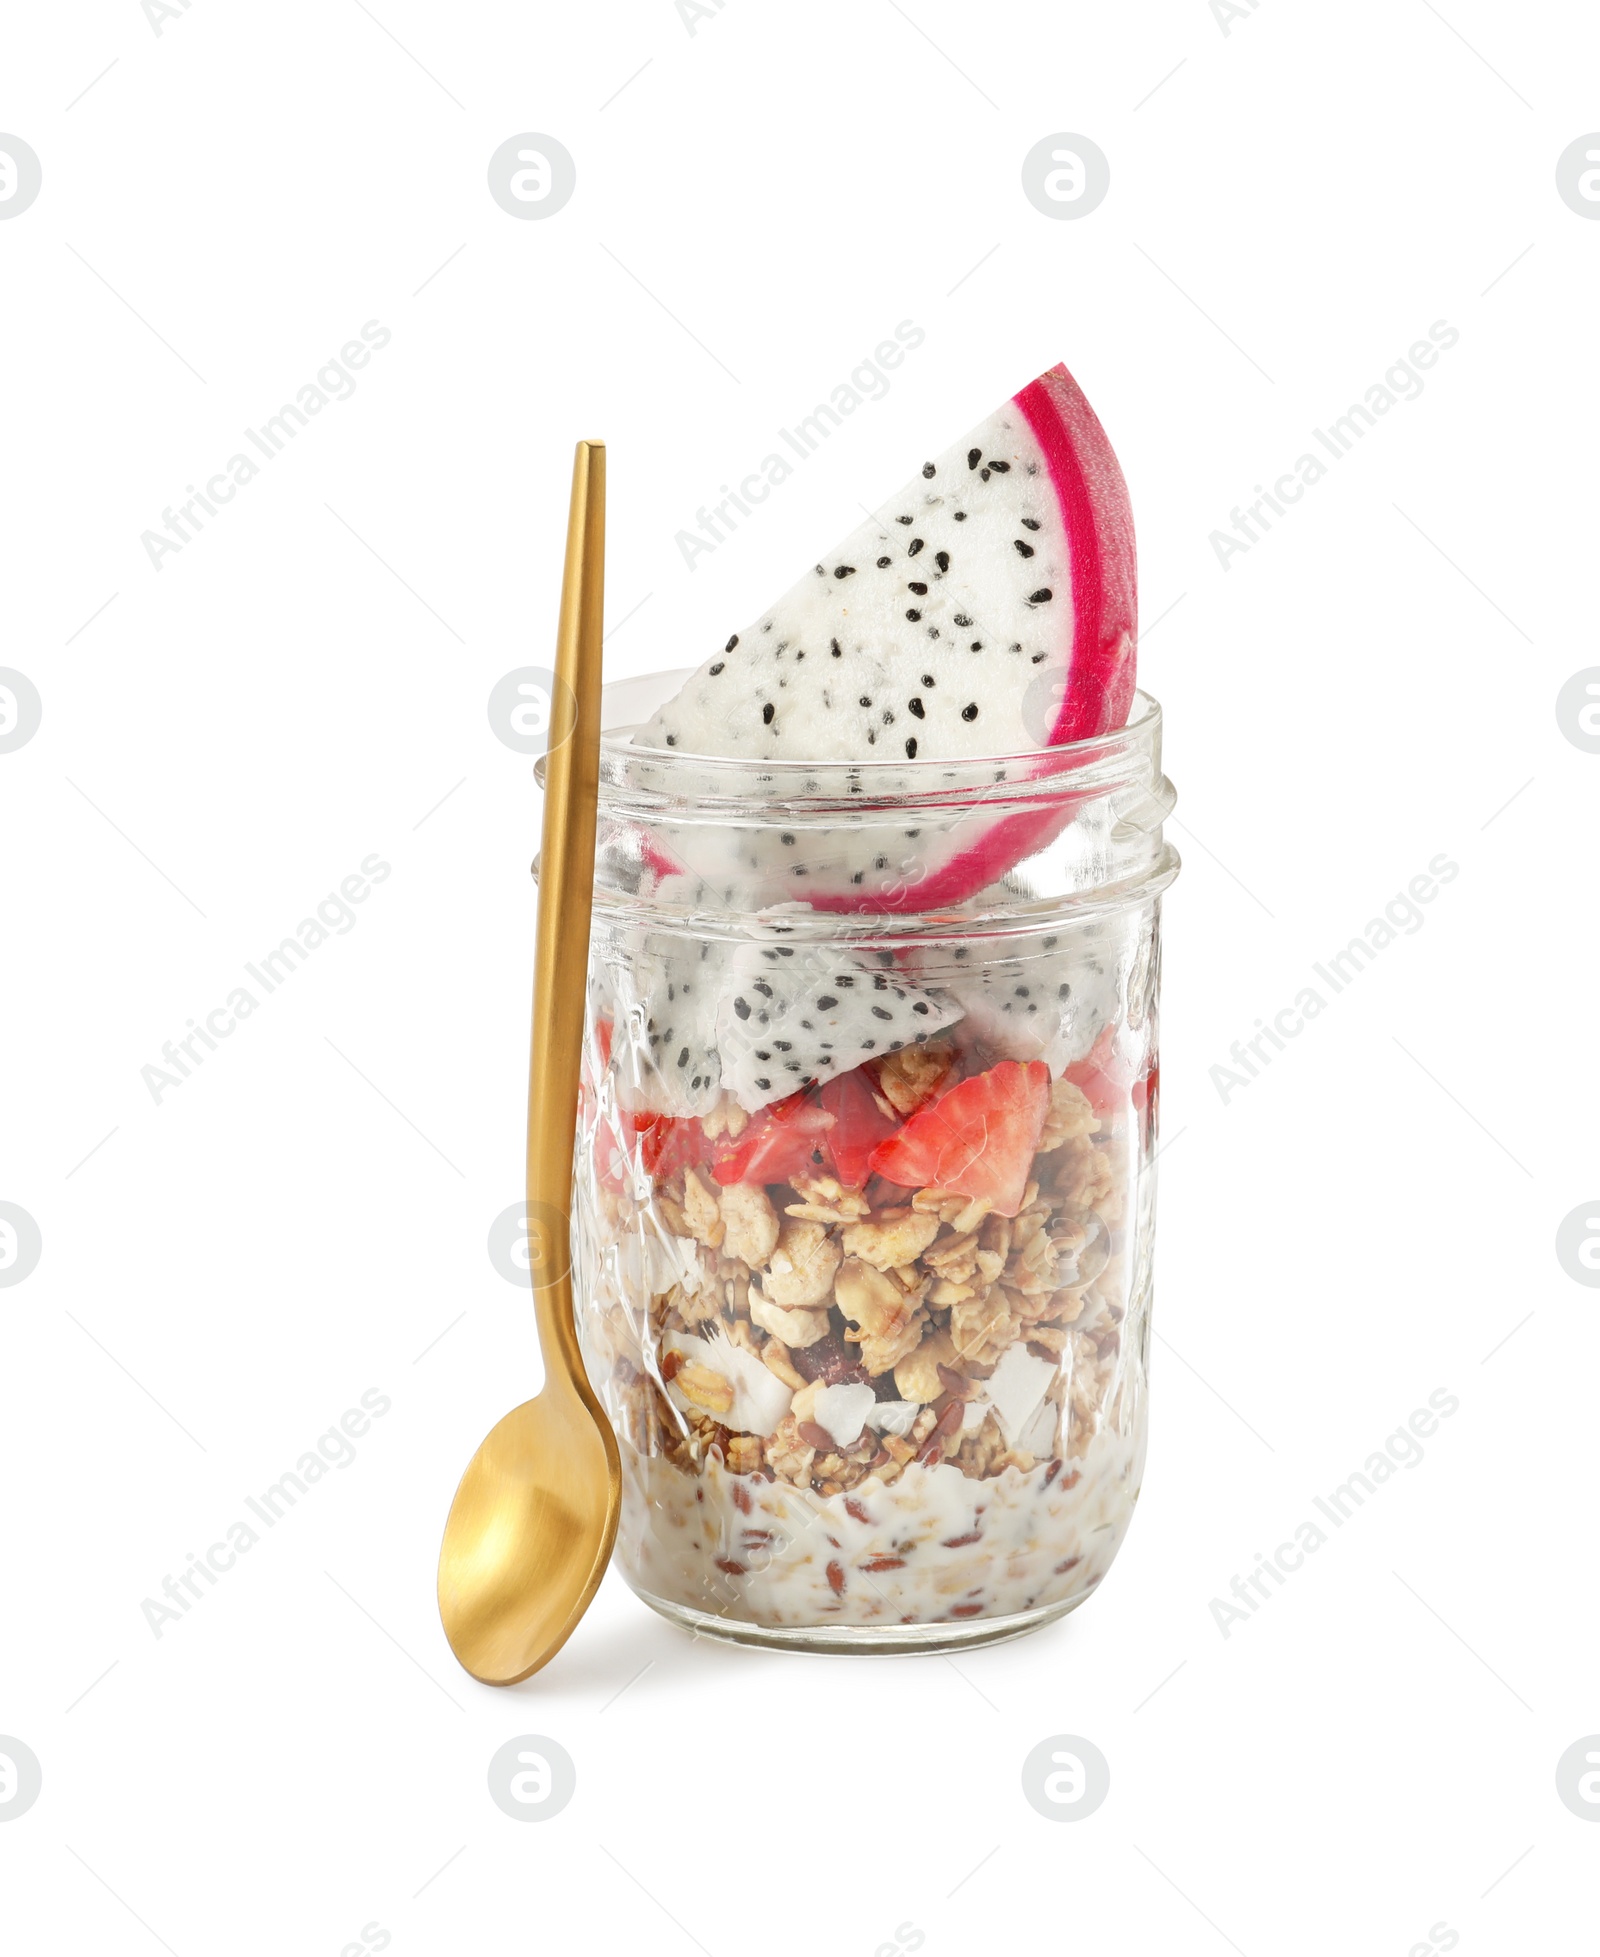 Photo of Granola with pitahaya and strawberries in glass jar on white background